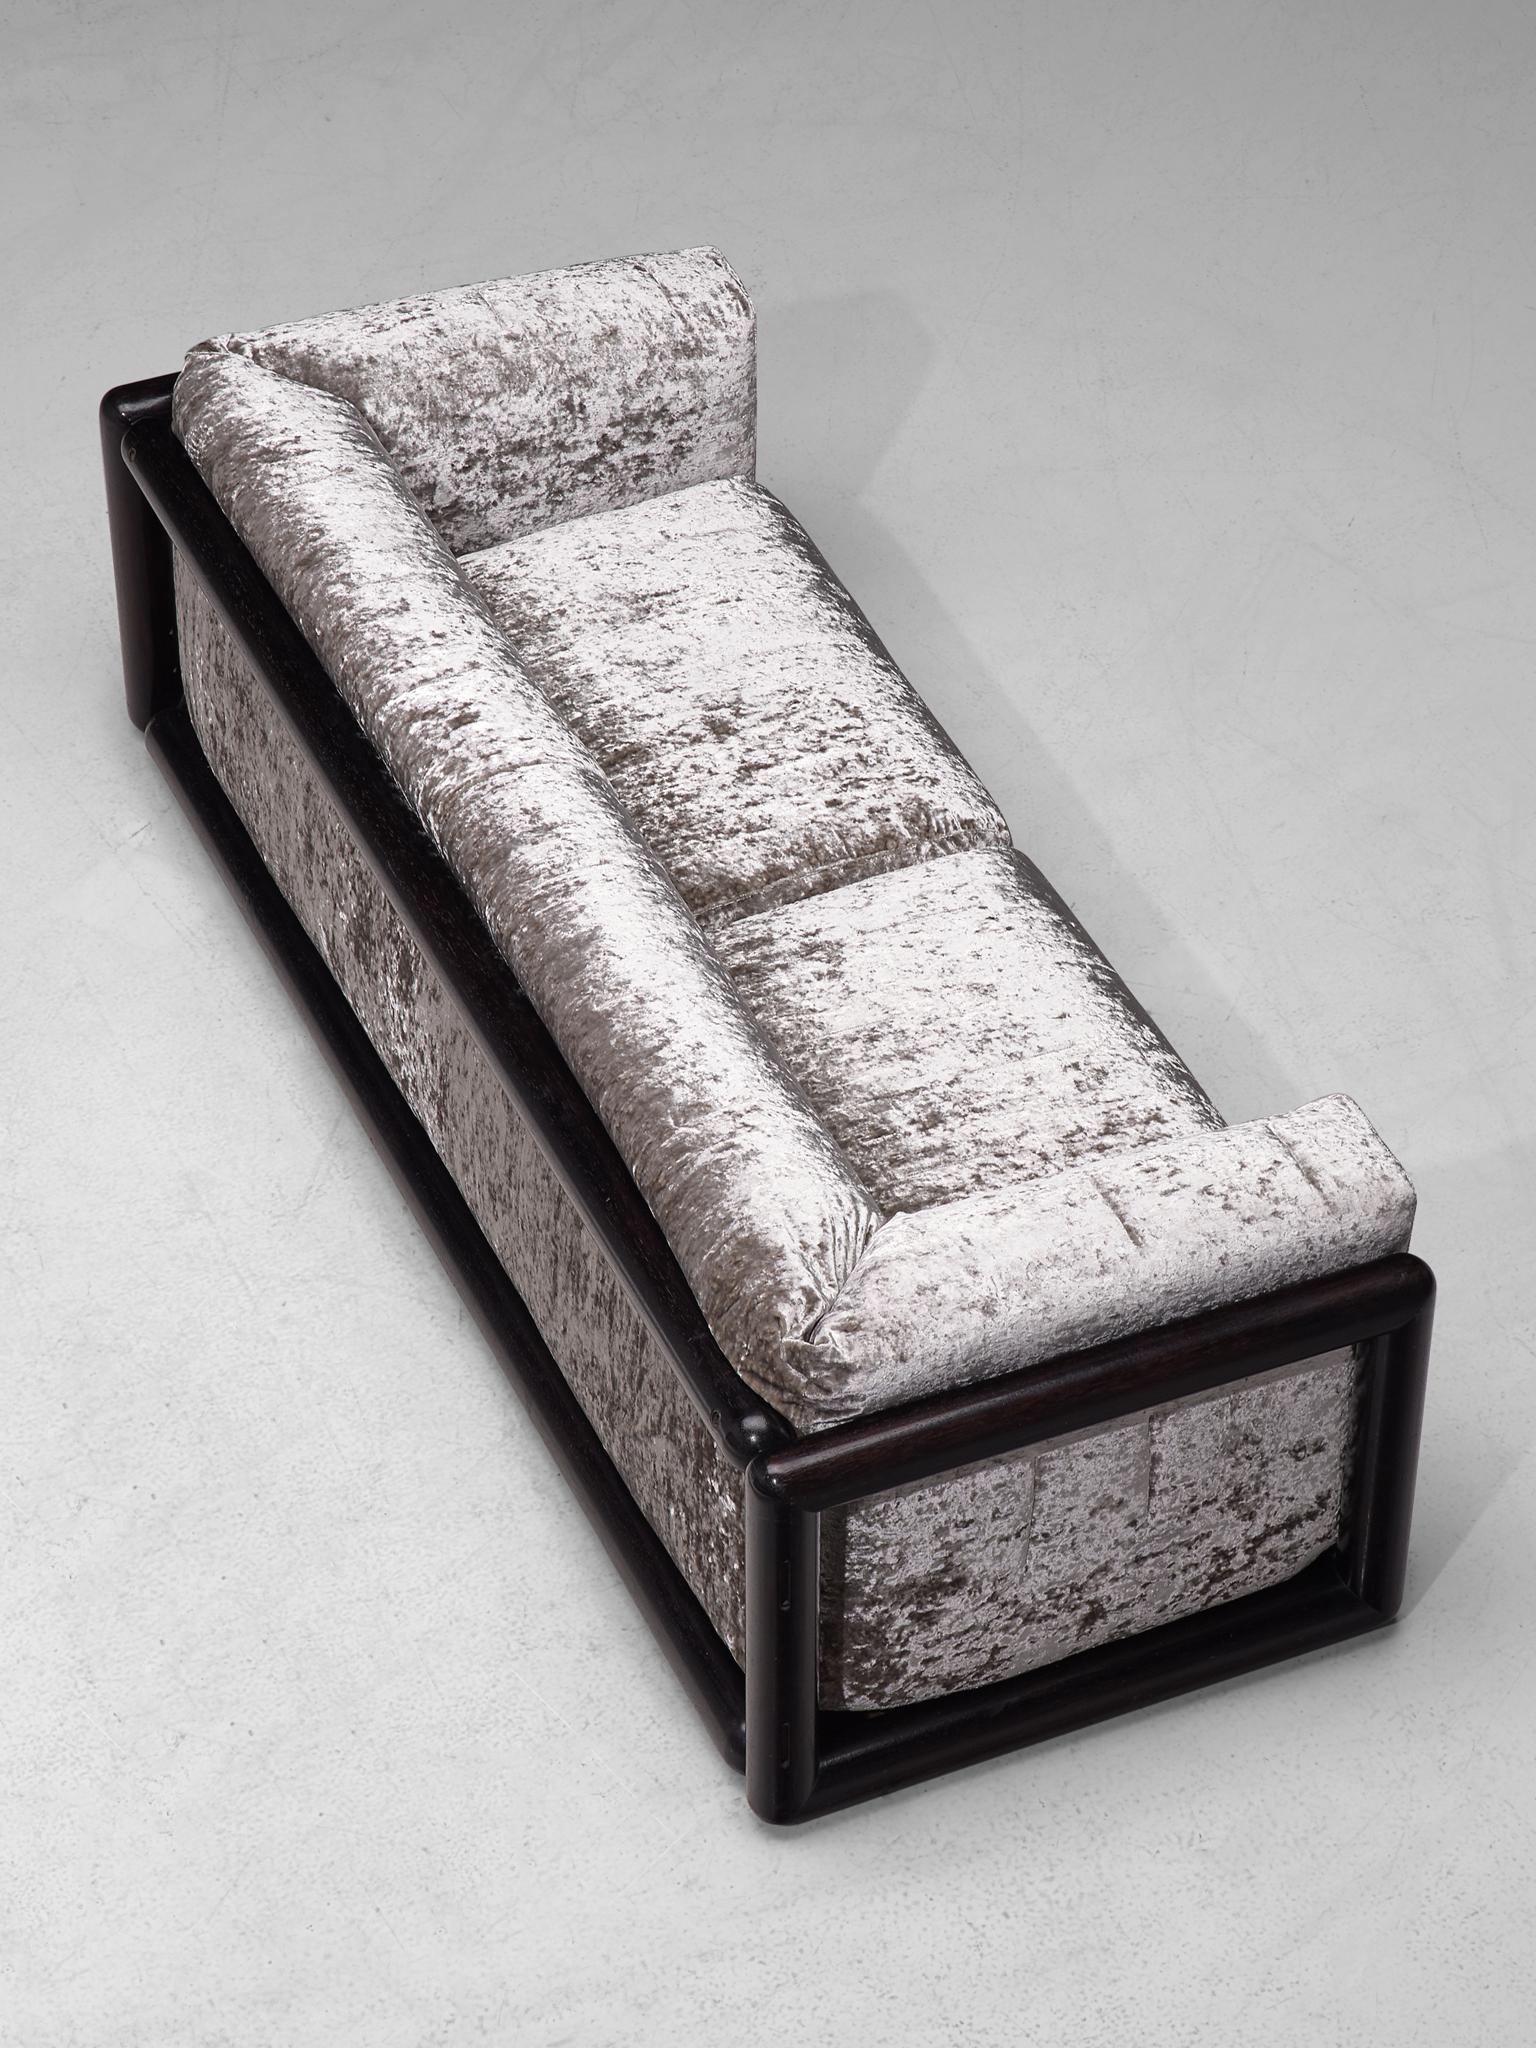 Carlo Scarpa for Simon, 'Cornaro' sofa, silver metallic velvet fabric, wood, Italy, 1973

The 'Cornaro' sofa by Carlo Scarpa is a perfect example of the Ultrarazionale style; breaking away from the strict limits of Rationalism, resulting in a sofa